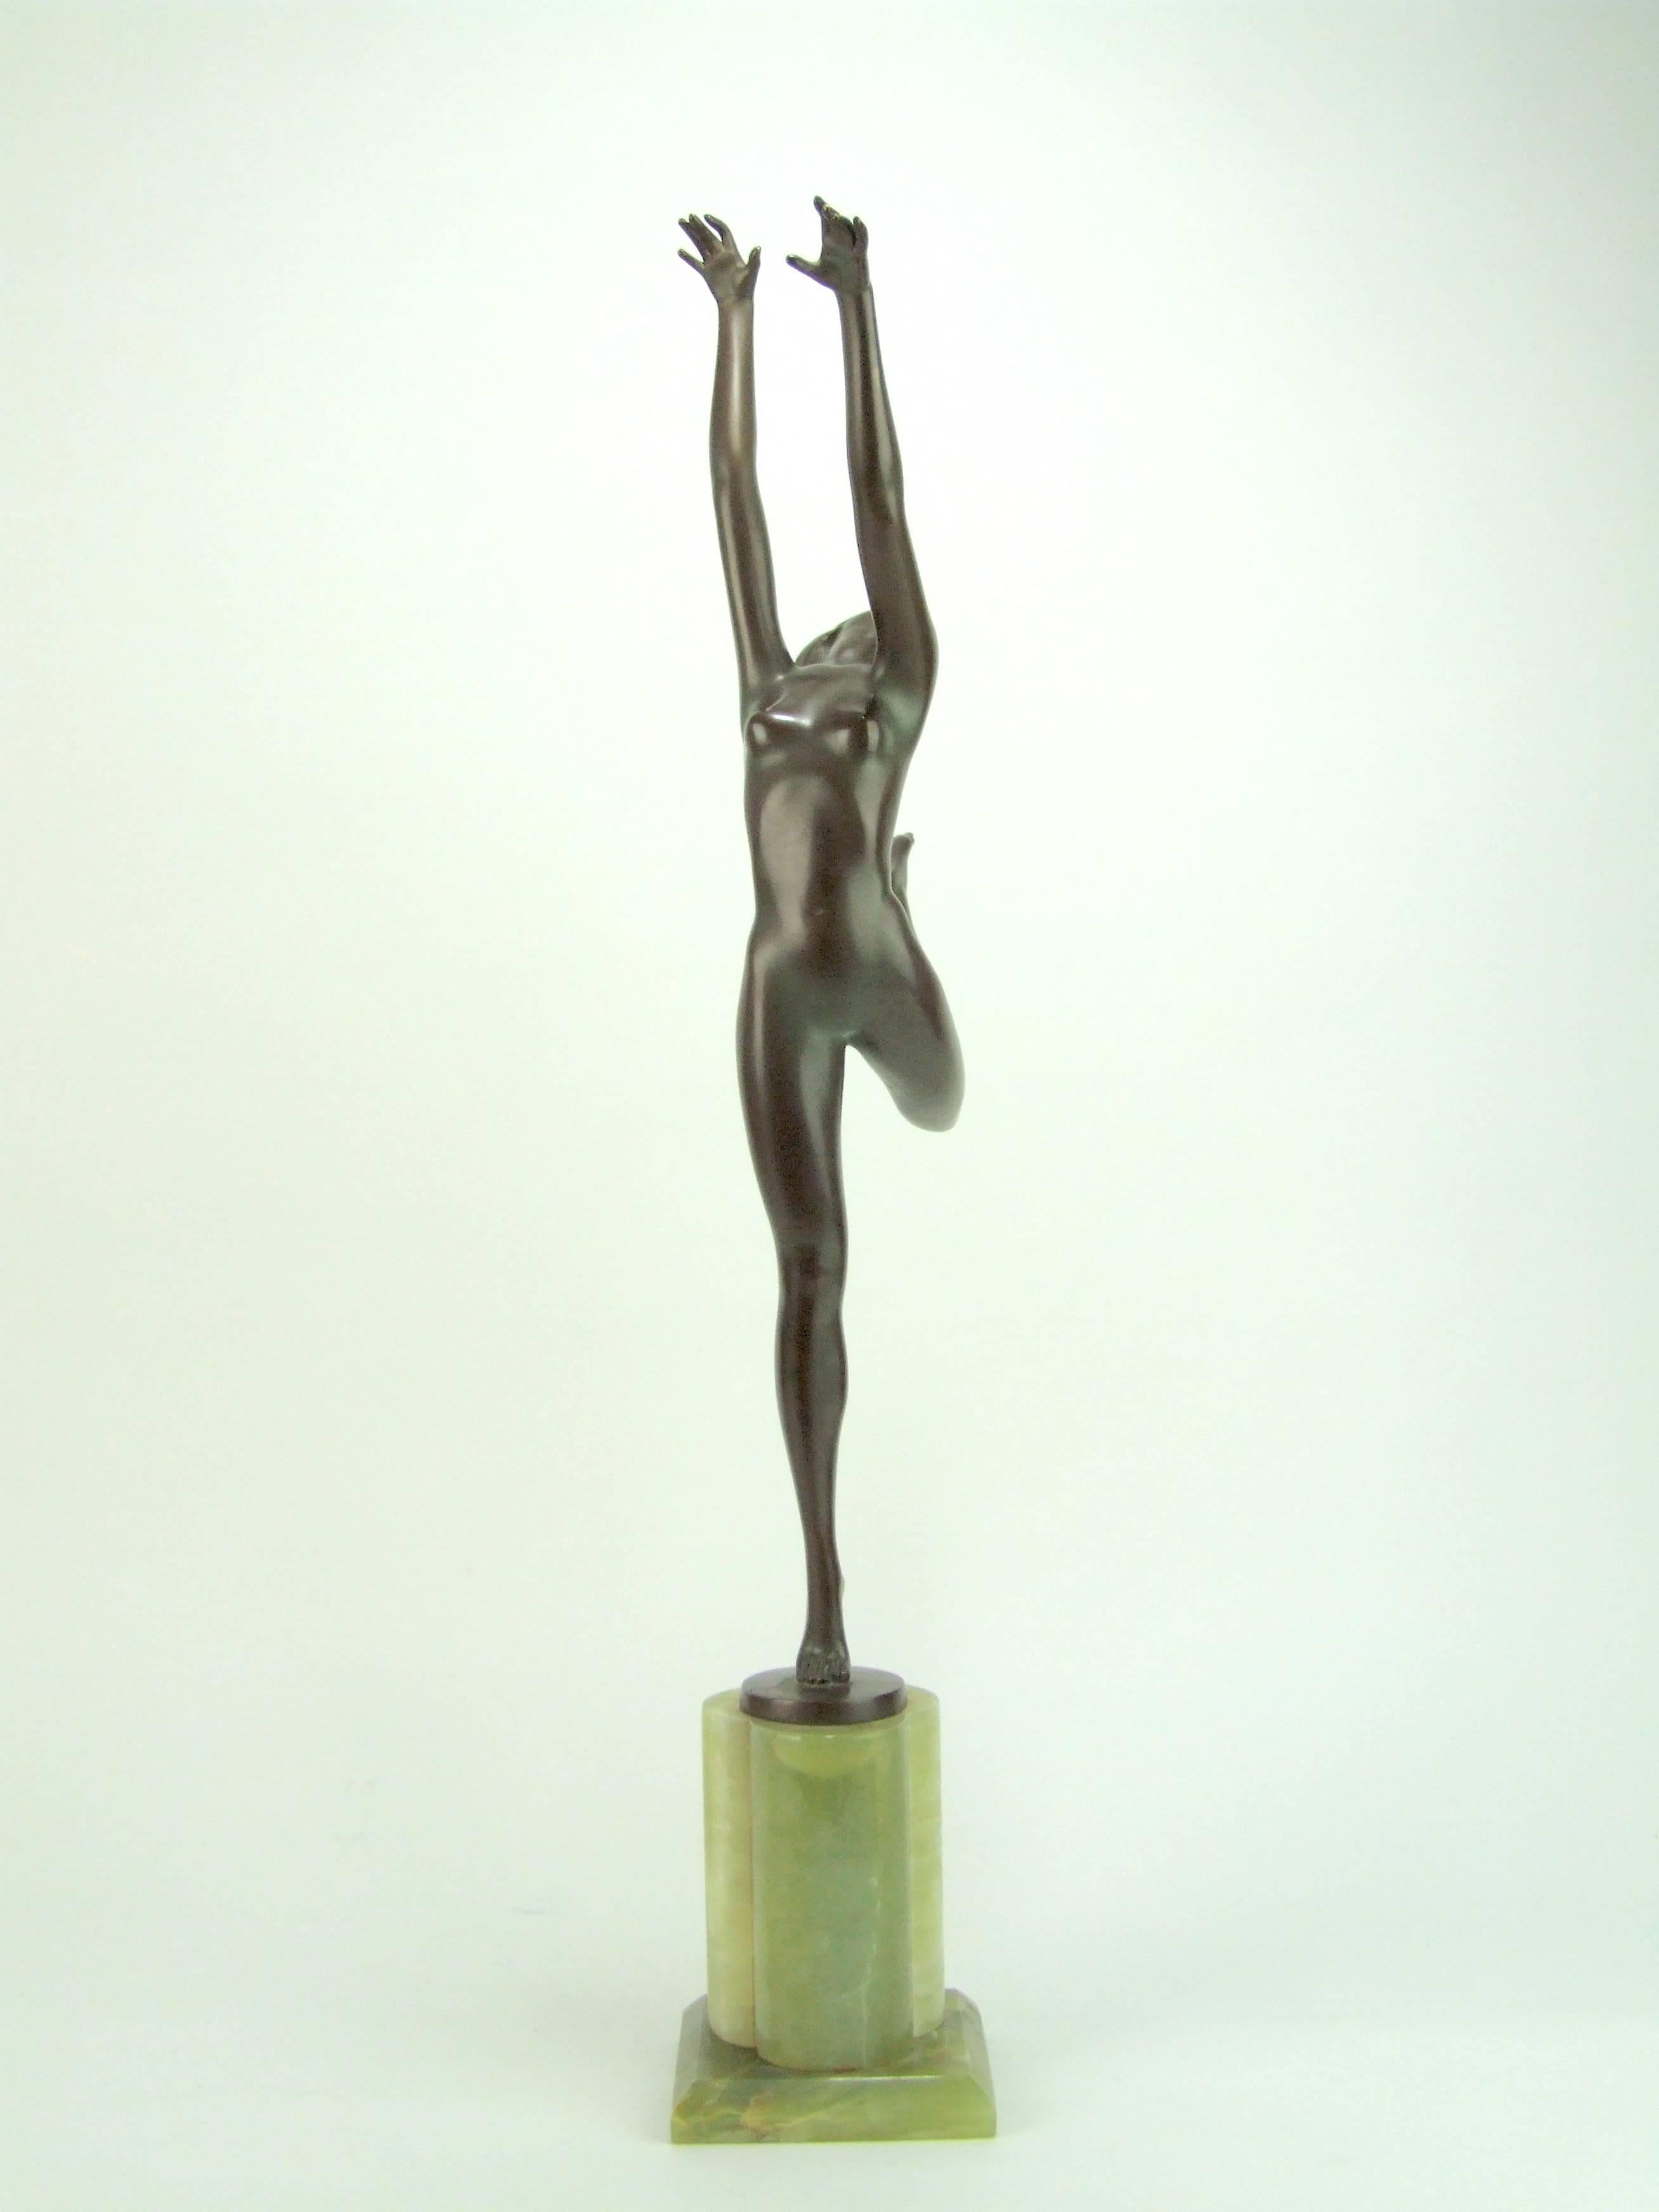 A large Art Deco bronze nude dancer by Josef Lorenzl. Signed to the bronze and mounted on a shaped onyx base. Measure: Total height is 26 inches (66cm) and she measures 11 inches (28cm) at her widest point. Condition is extremely good.